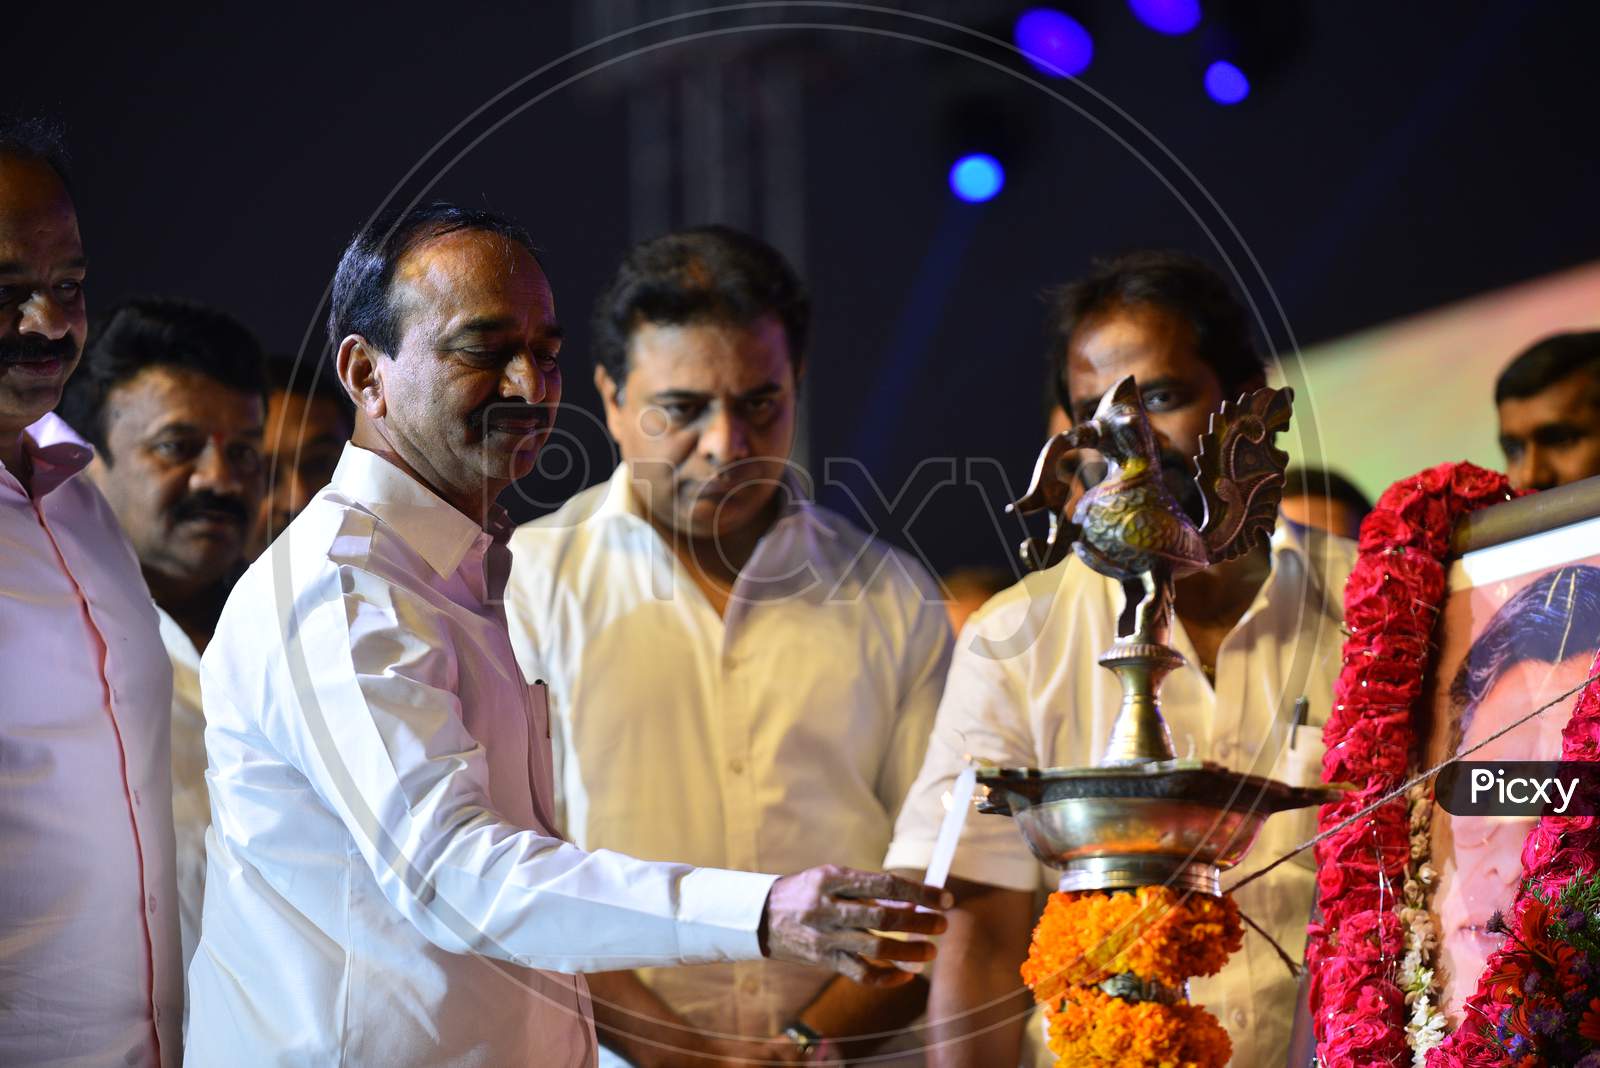 Telangana Ministers Etela Rajender and K. T. Rama Rao  Attending An Event